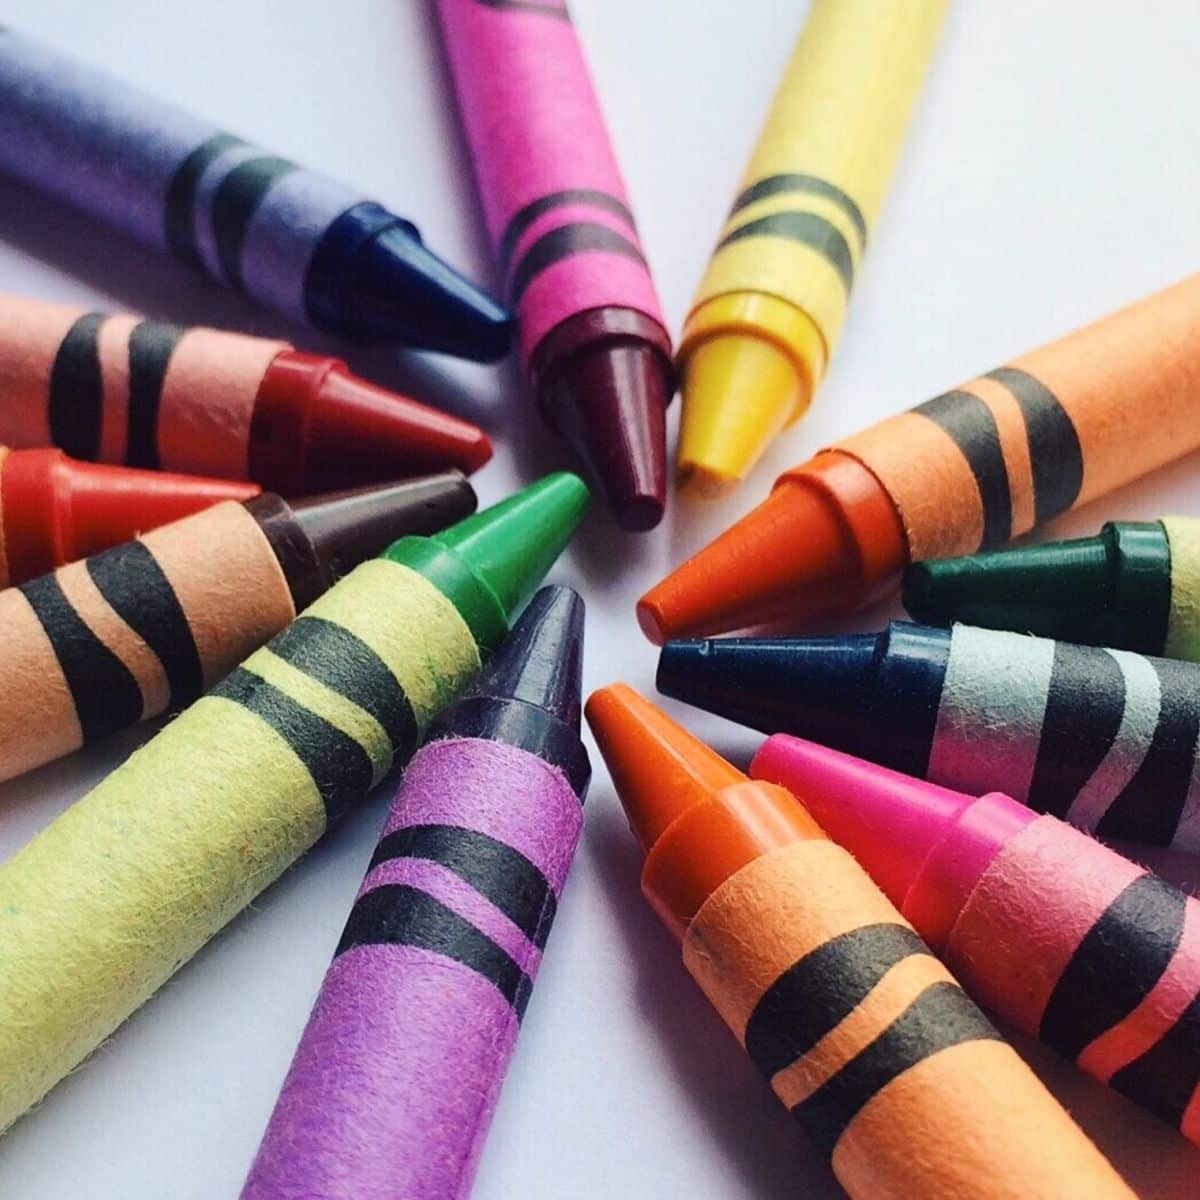 Bunch of colorful crayons.